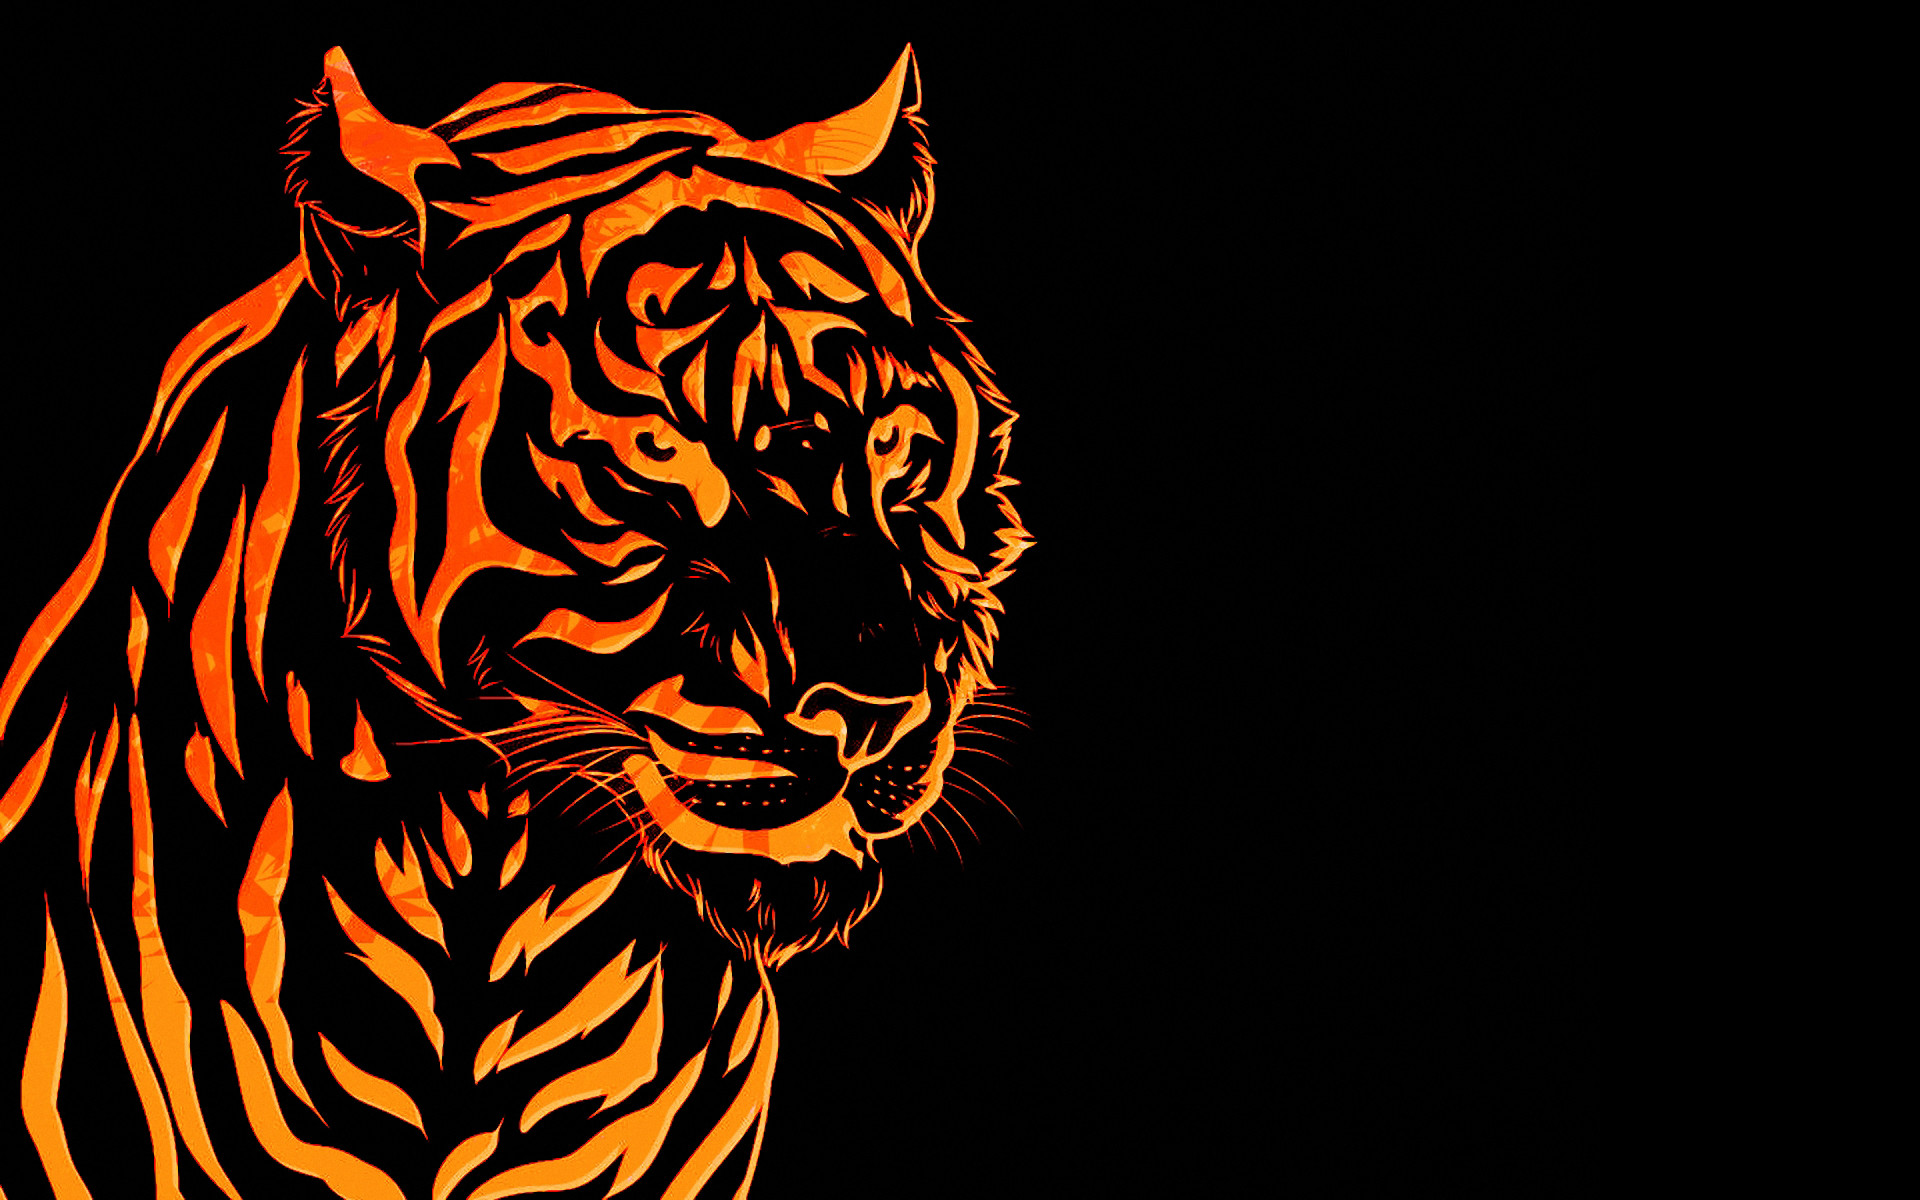 For those who love tigers! I made this as a pc wallpaper , drawn with  photoshop. Please give me feed back if you like this c) Fire Tiger wallpaper